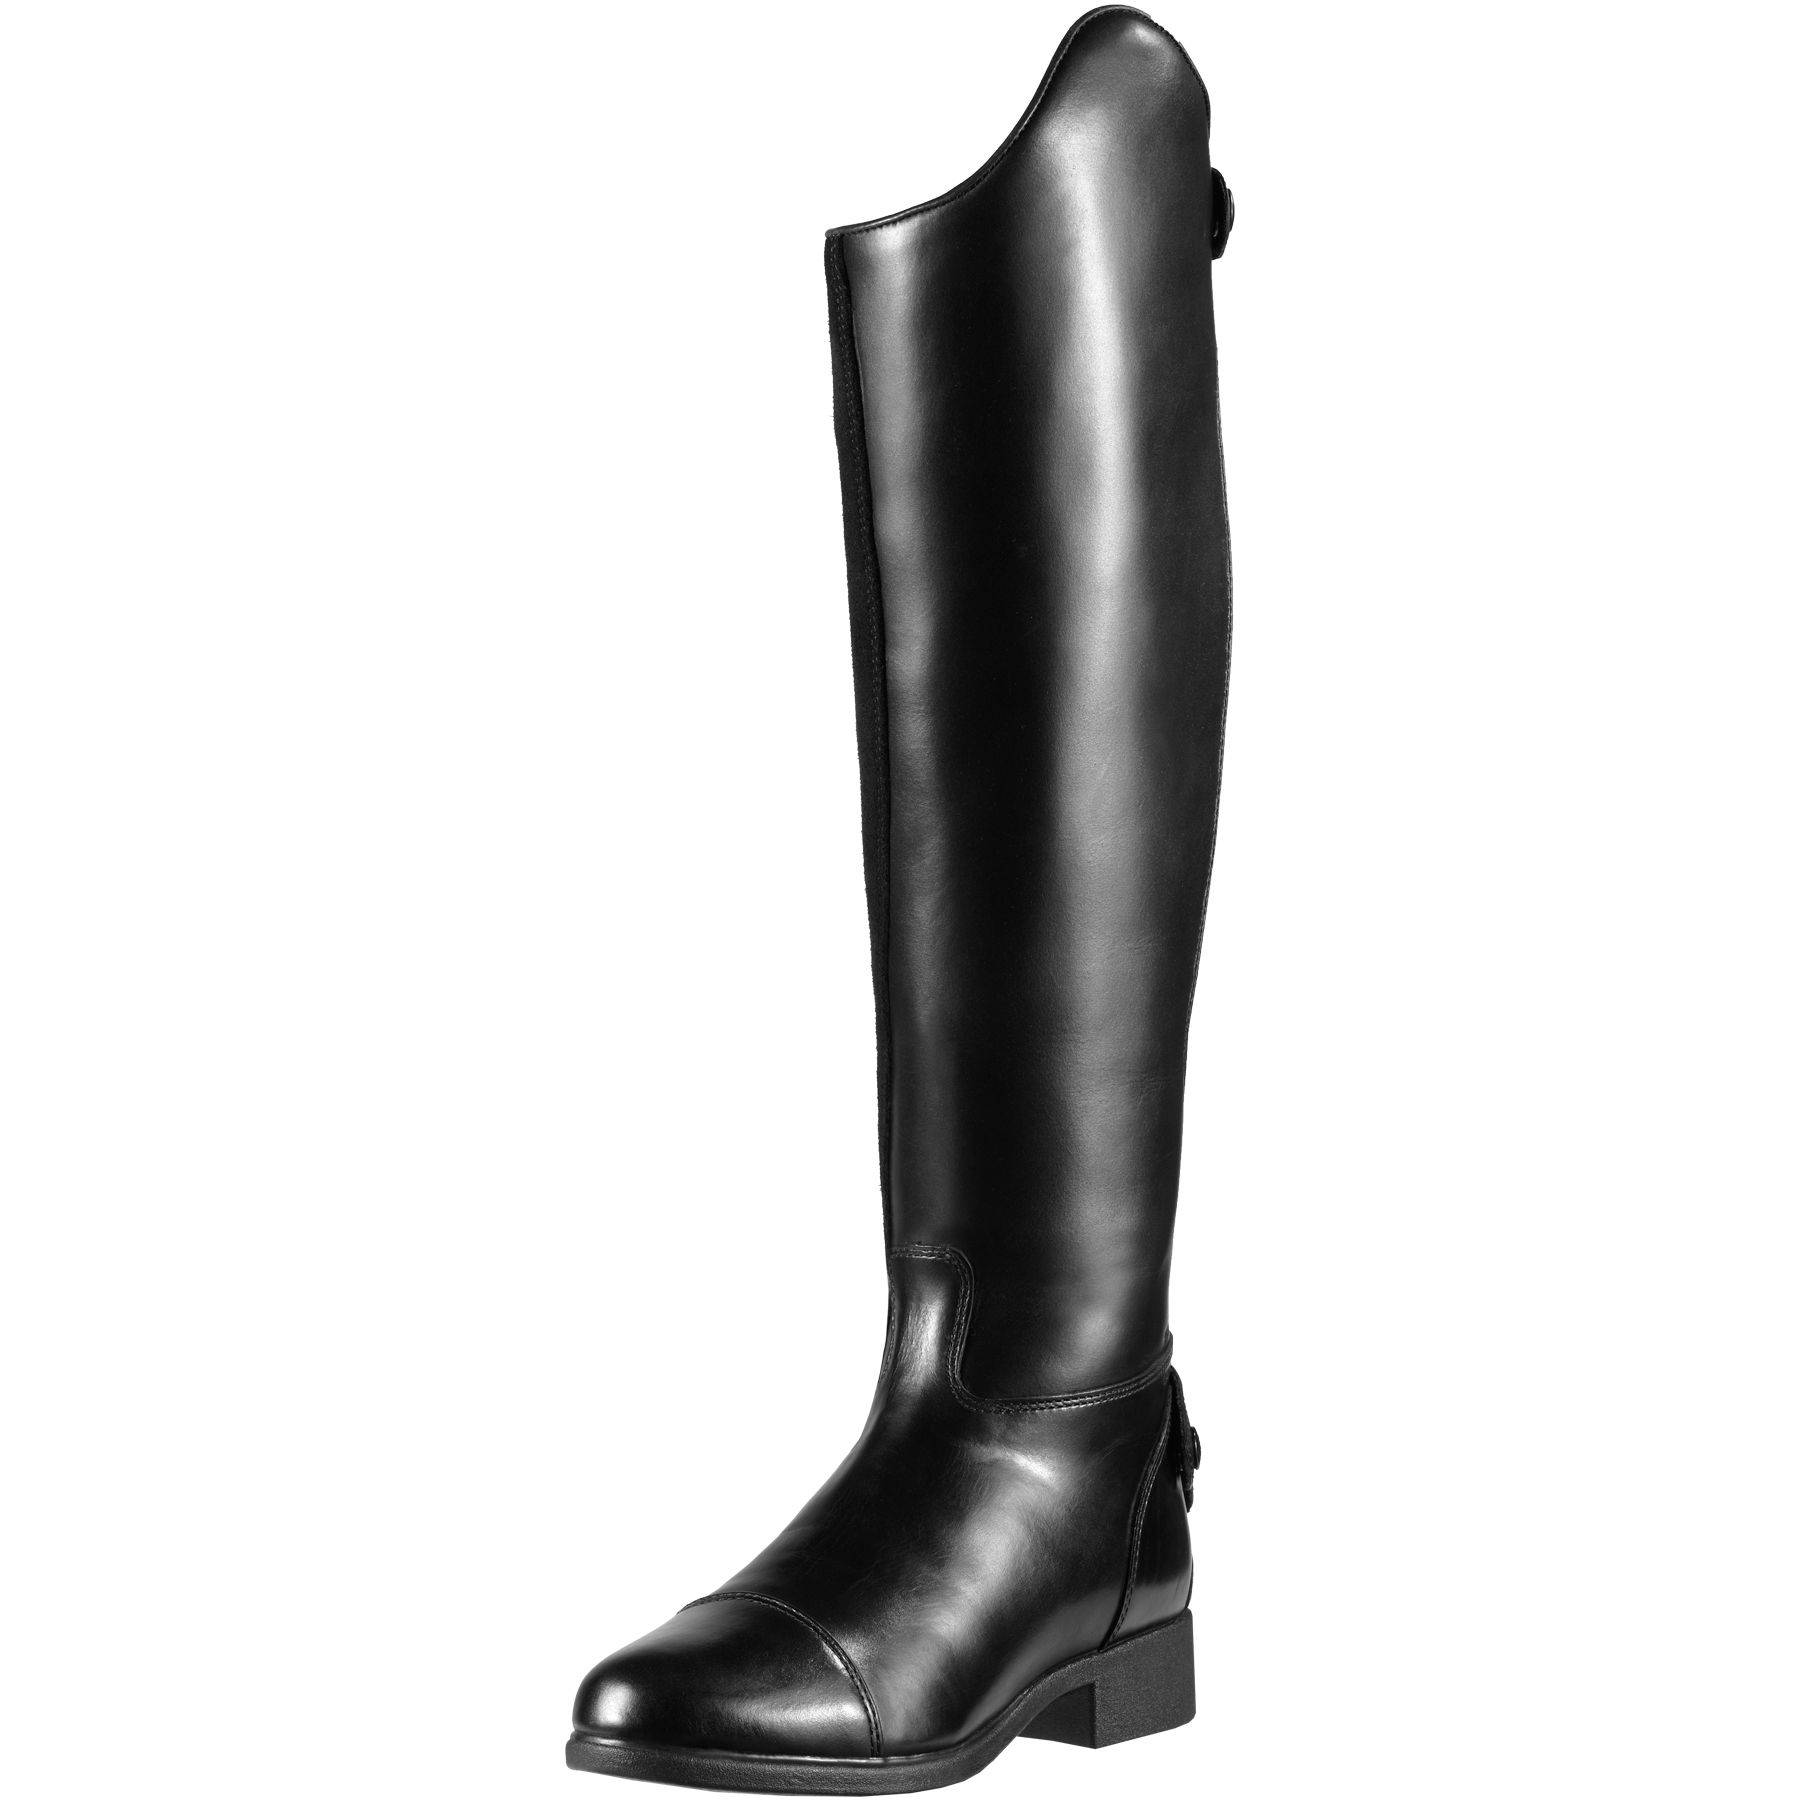 Ariat Bromont Insulated Tall Boots Ladies Waxed Black